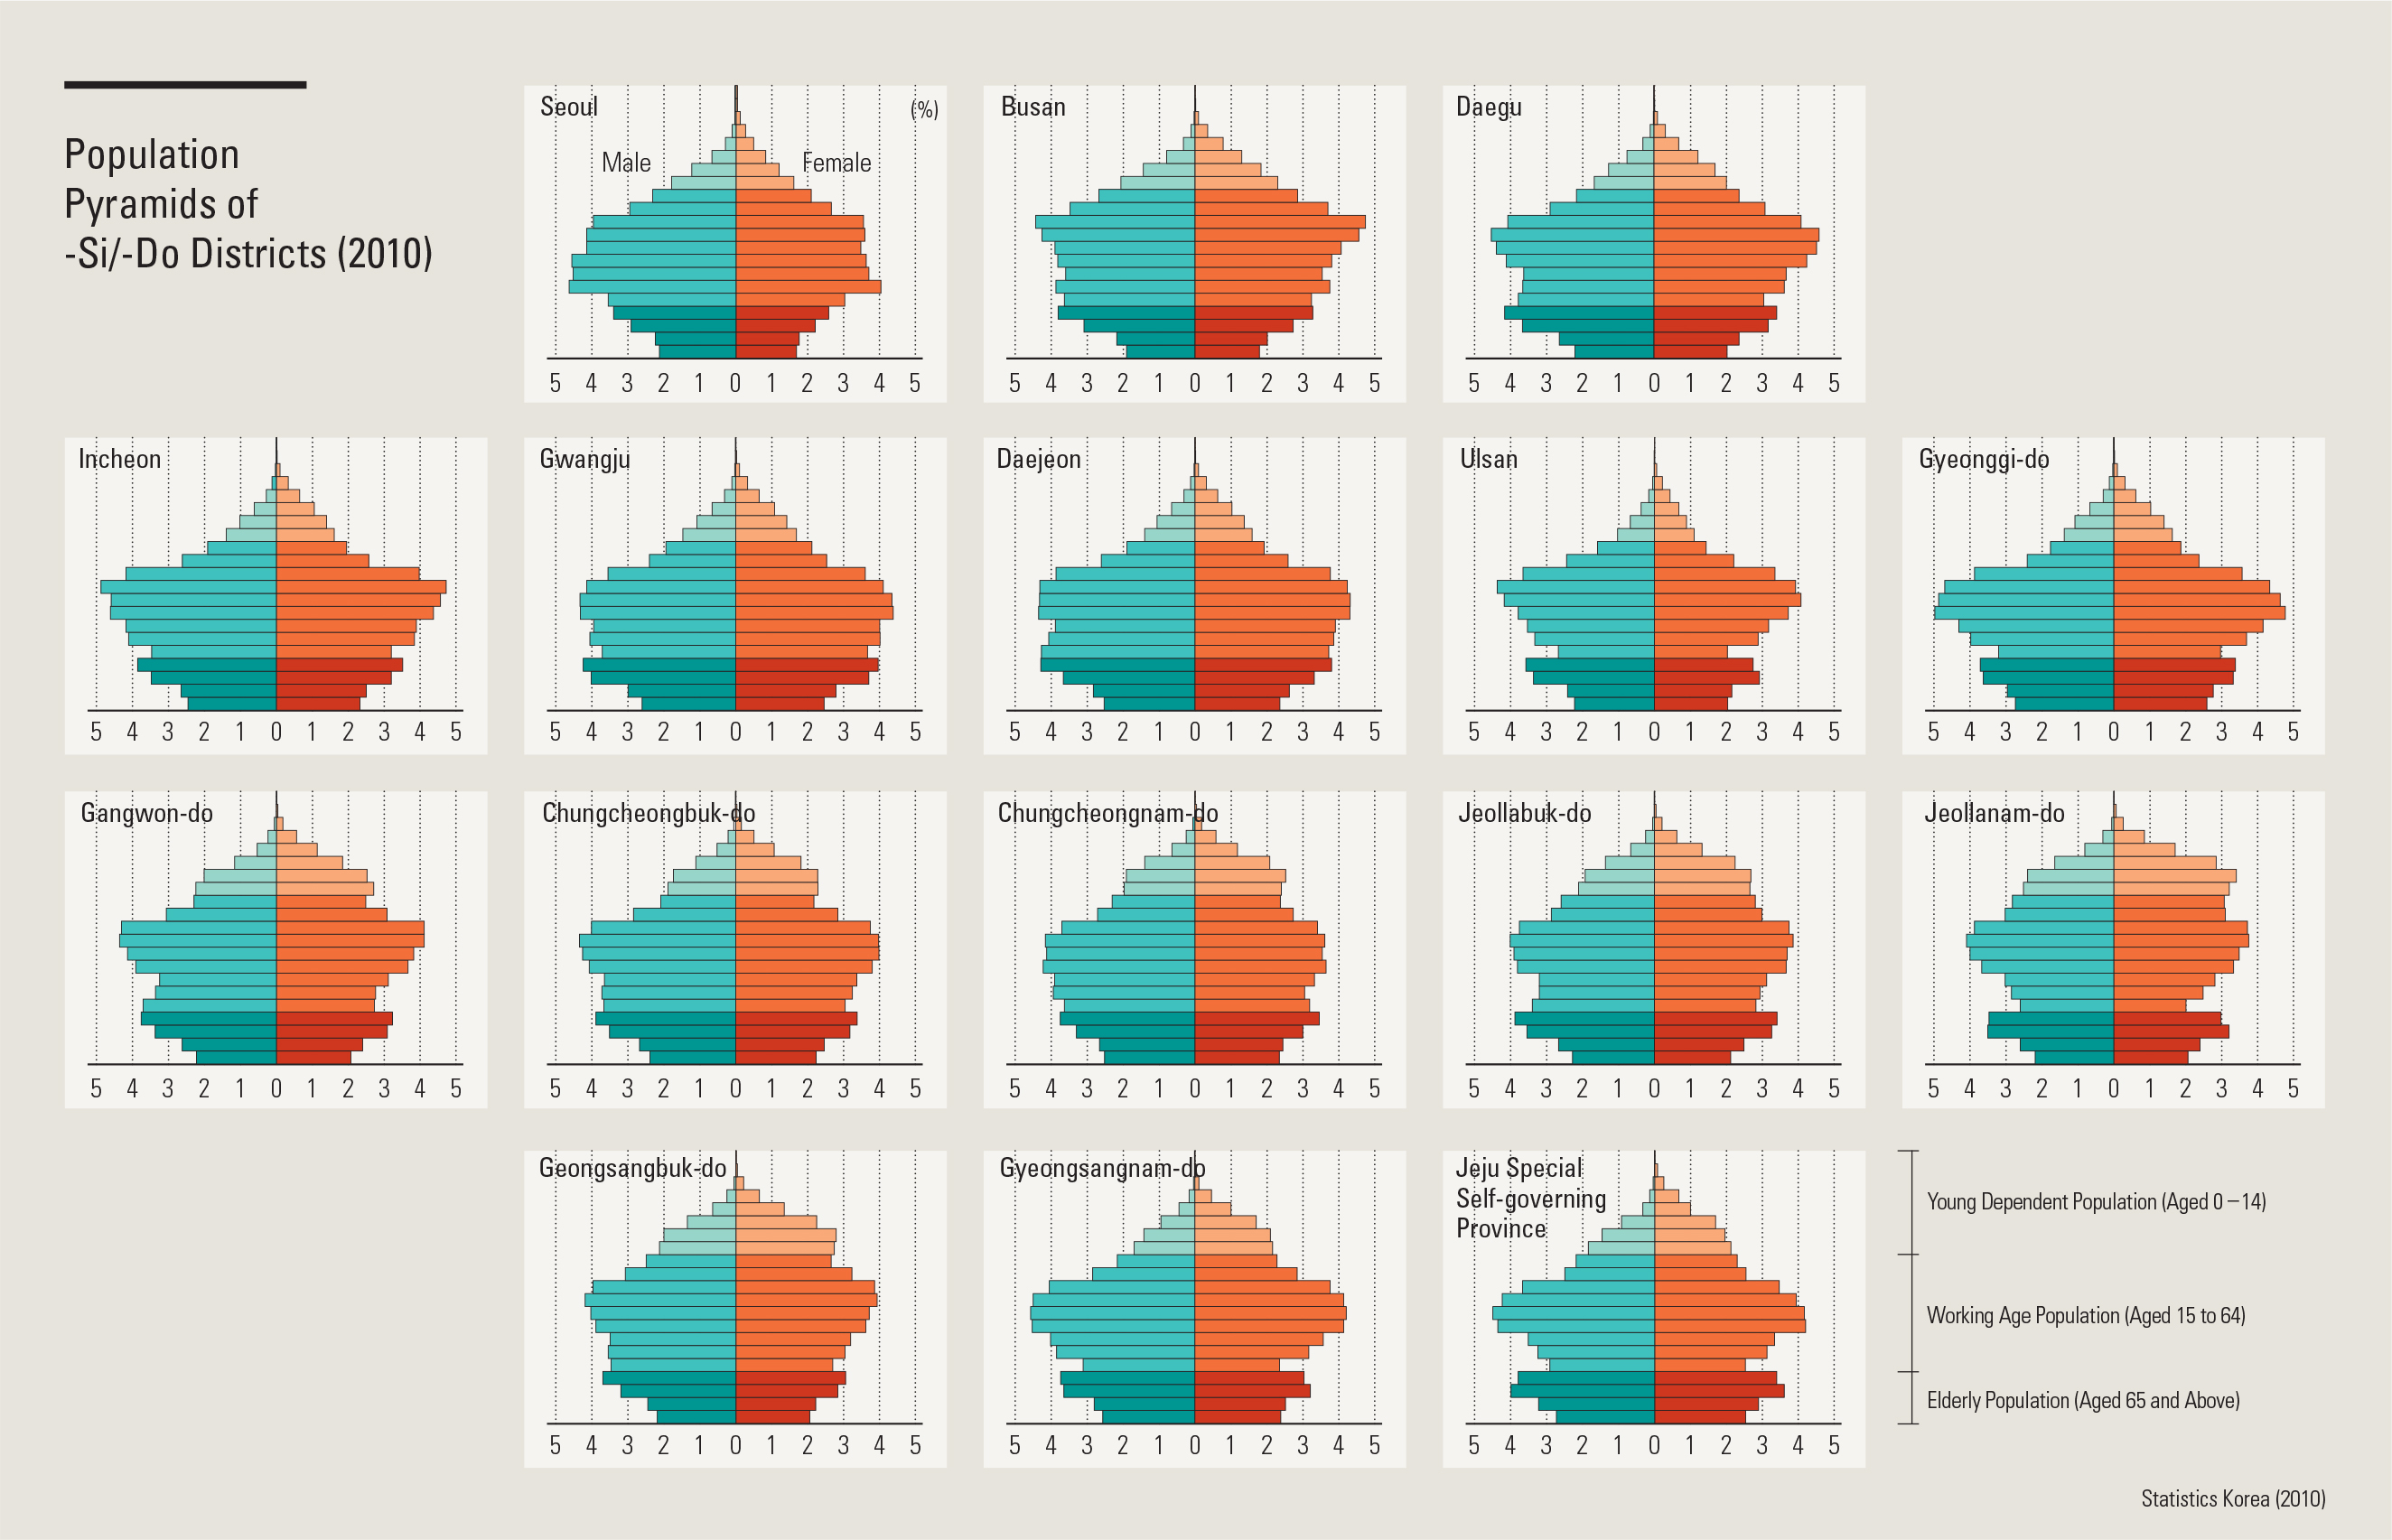 Population Pyramids of -Si/-Do Districts (2010)<p class="oz_zoom" zimg="http://imagedata.cafe24.com/us_3/us3_119-3_2.jpg"><span style="font-family:Nanum Myeongjo;"><span style="font-size:18px;"><span class="label label-danger">UPDATE DATA</span></span></p>